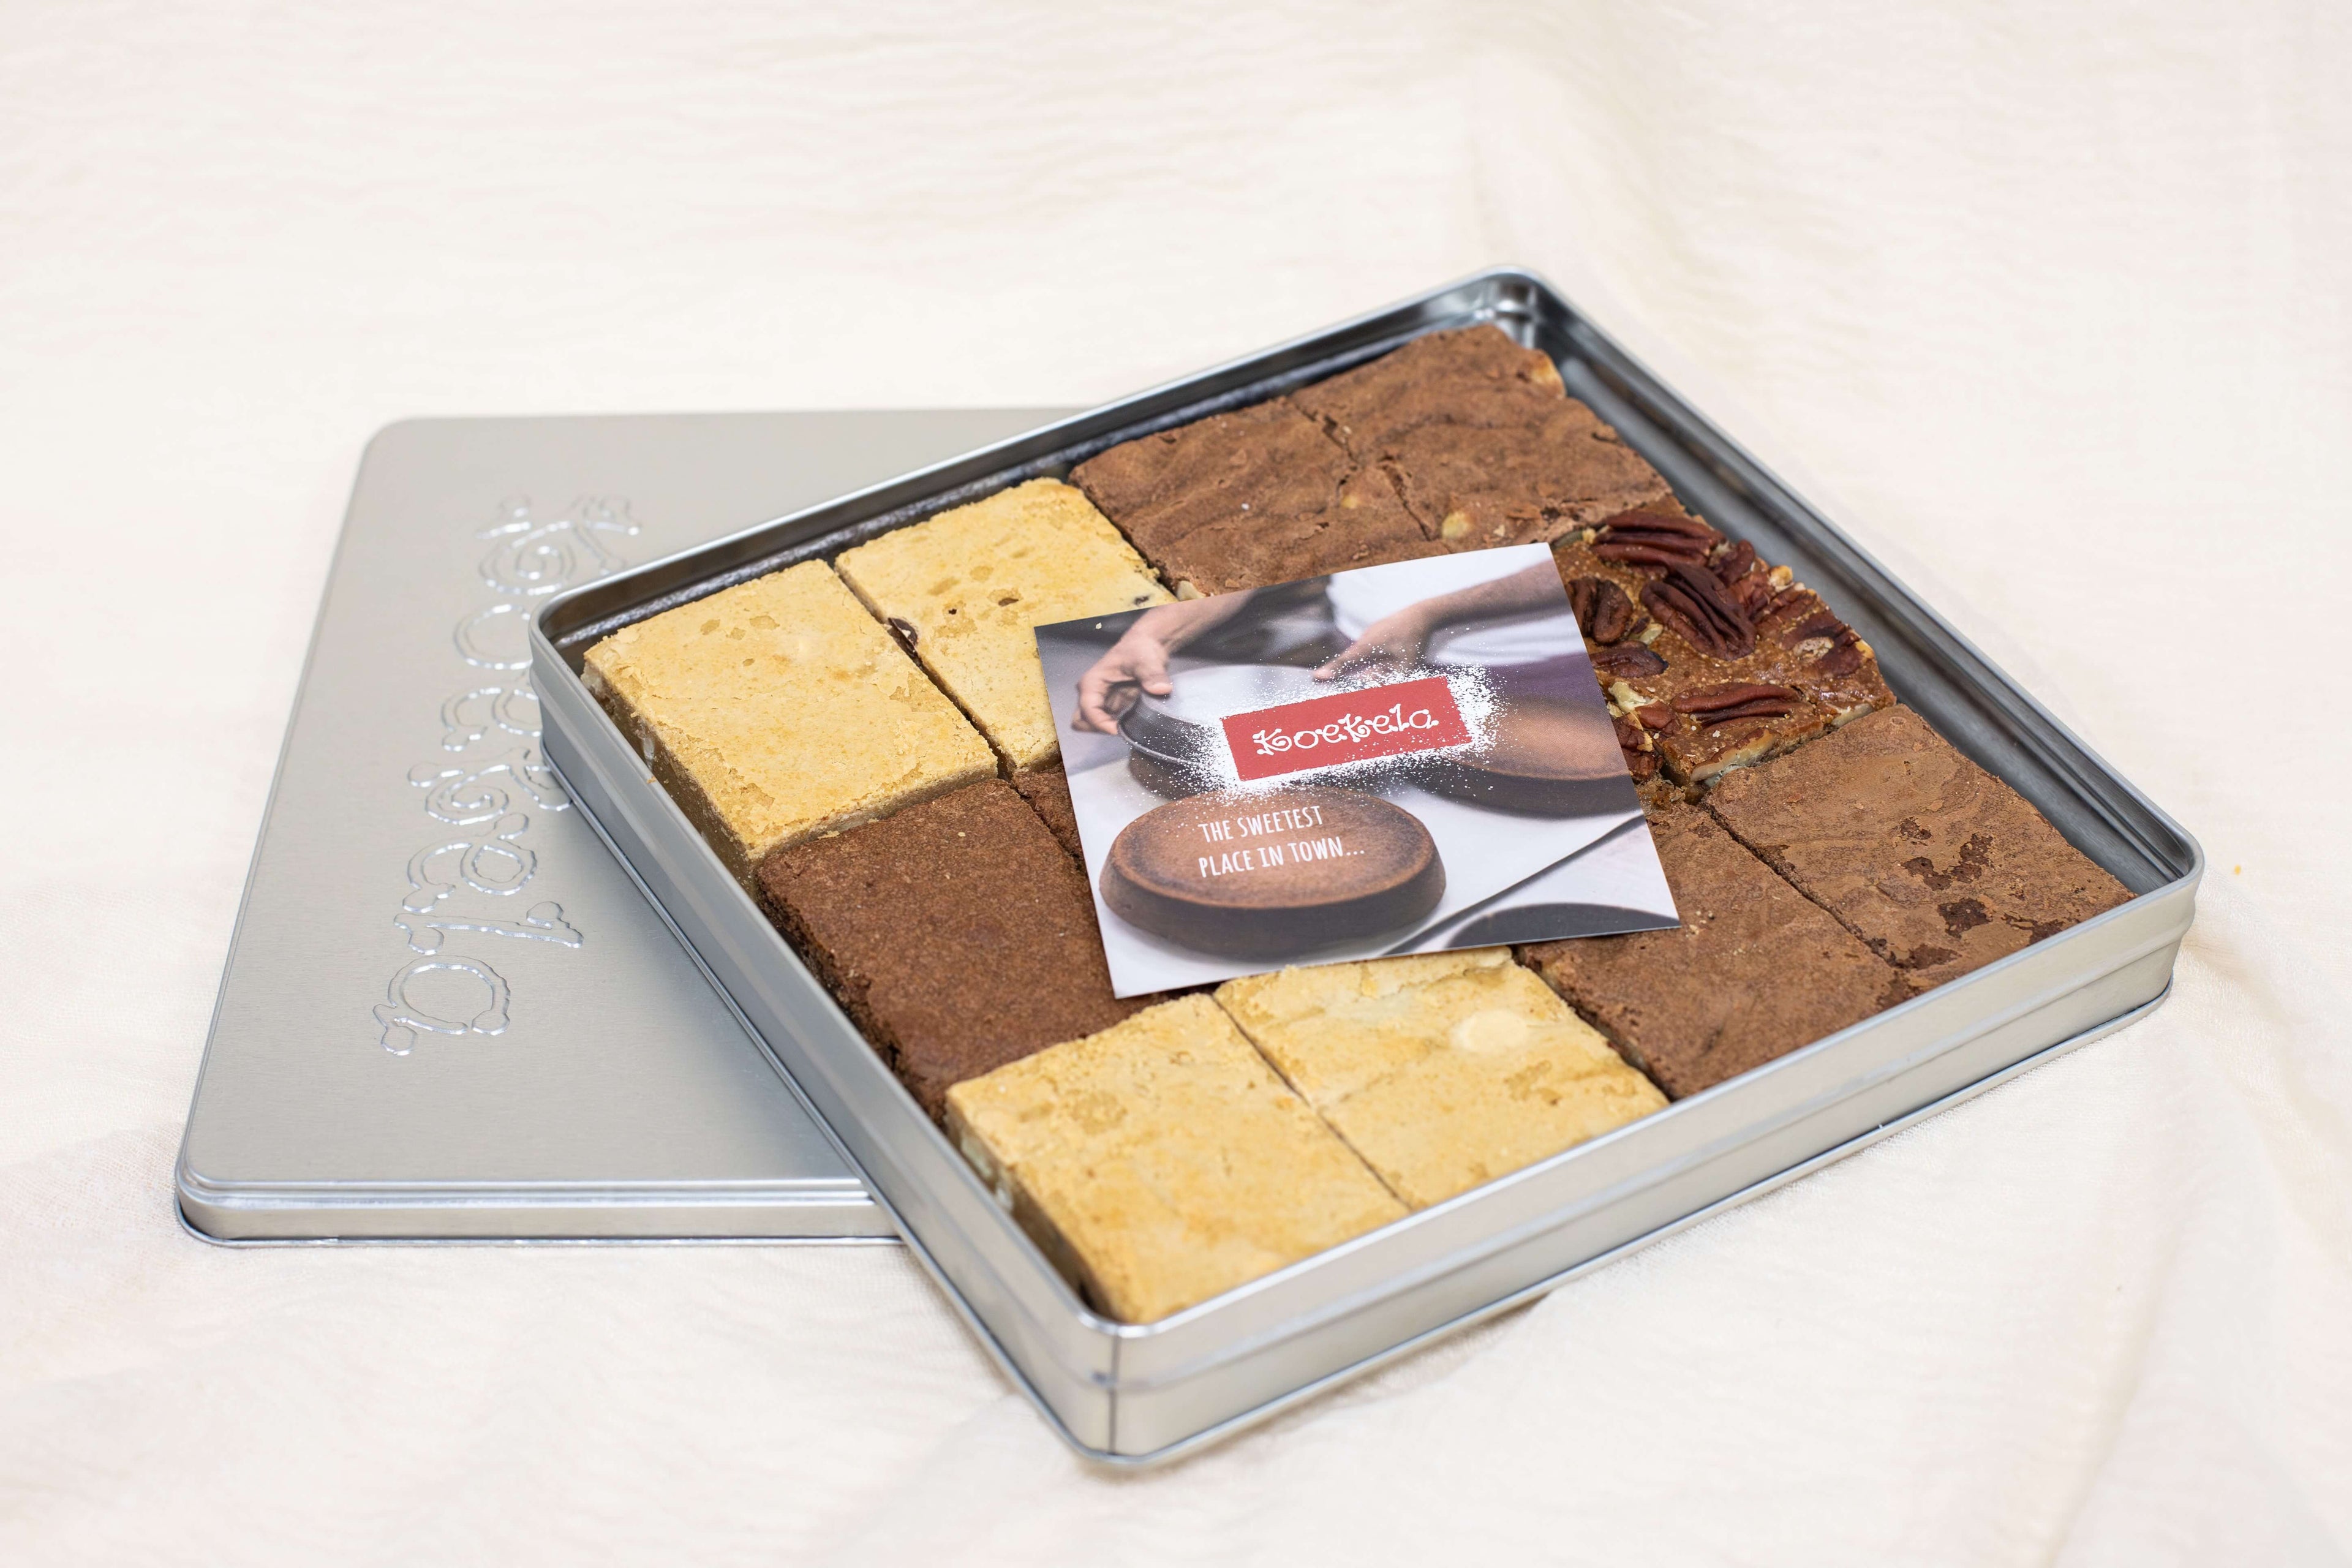 Koekela’s Silver Tin Filled With 12 Brownies And Blondies